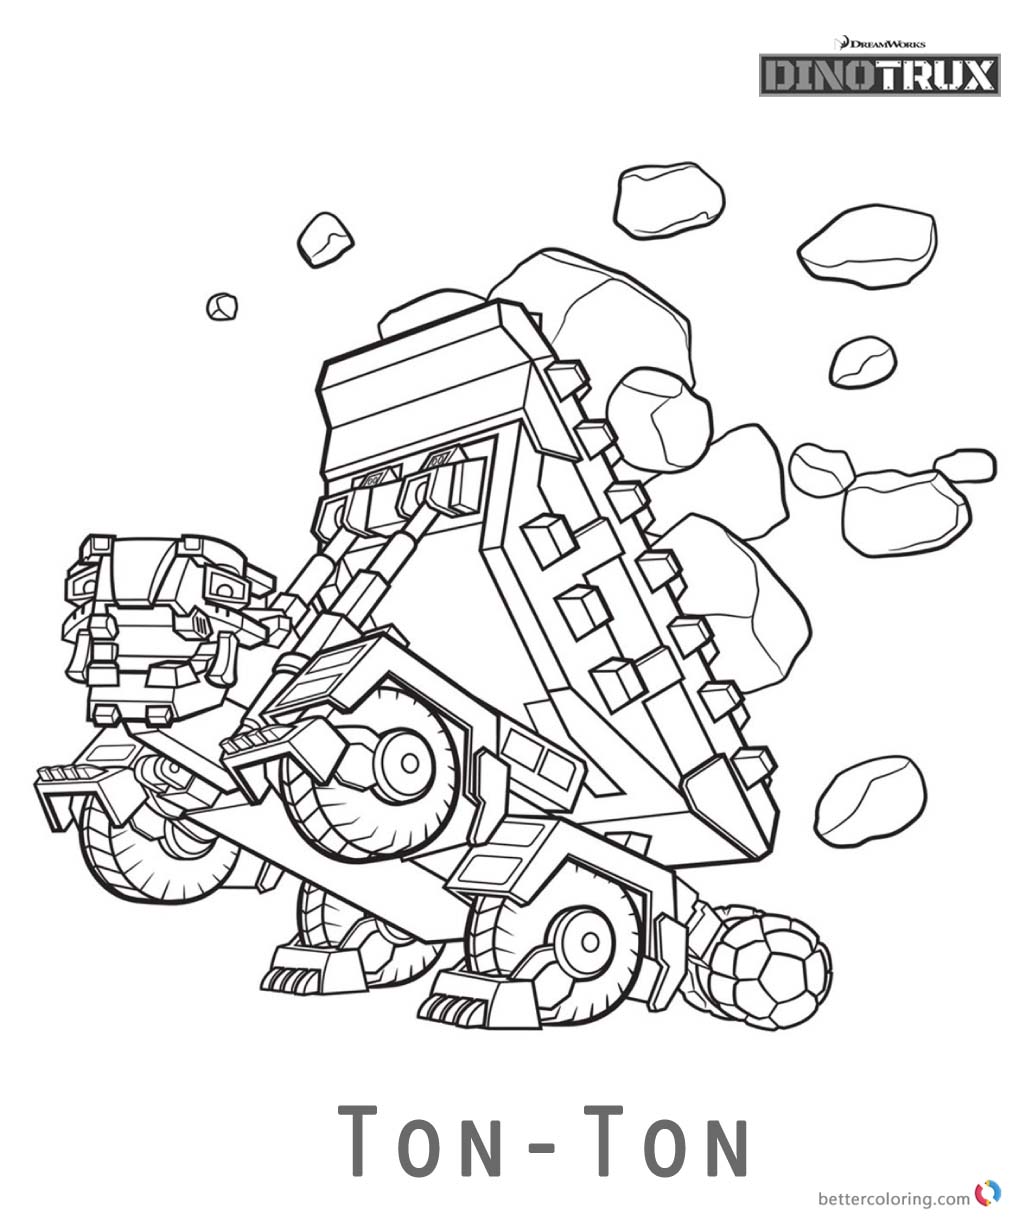 Dinotrux coloring pages Ton-Ton printable